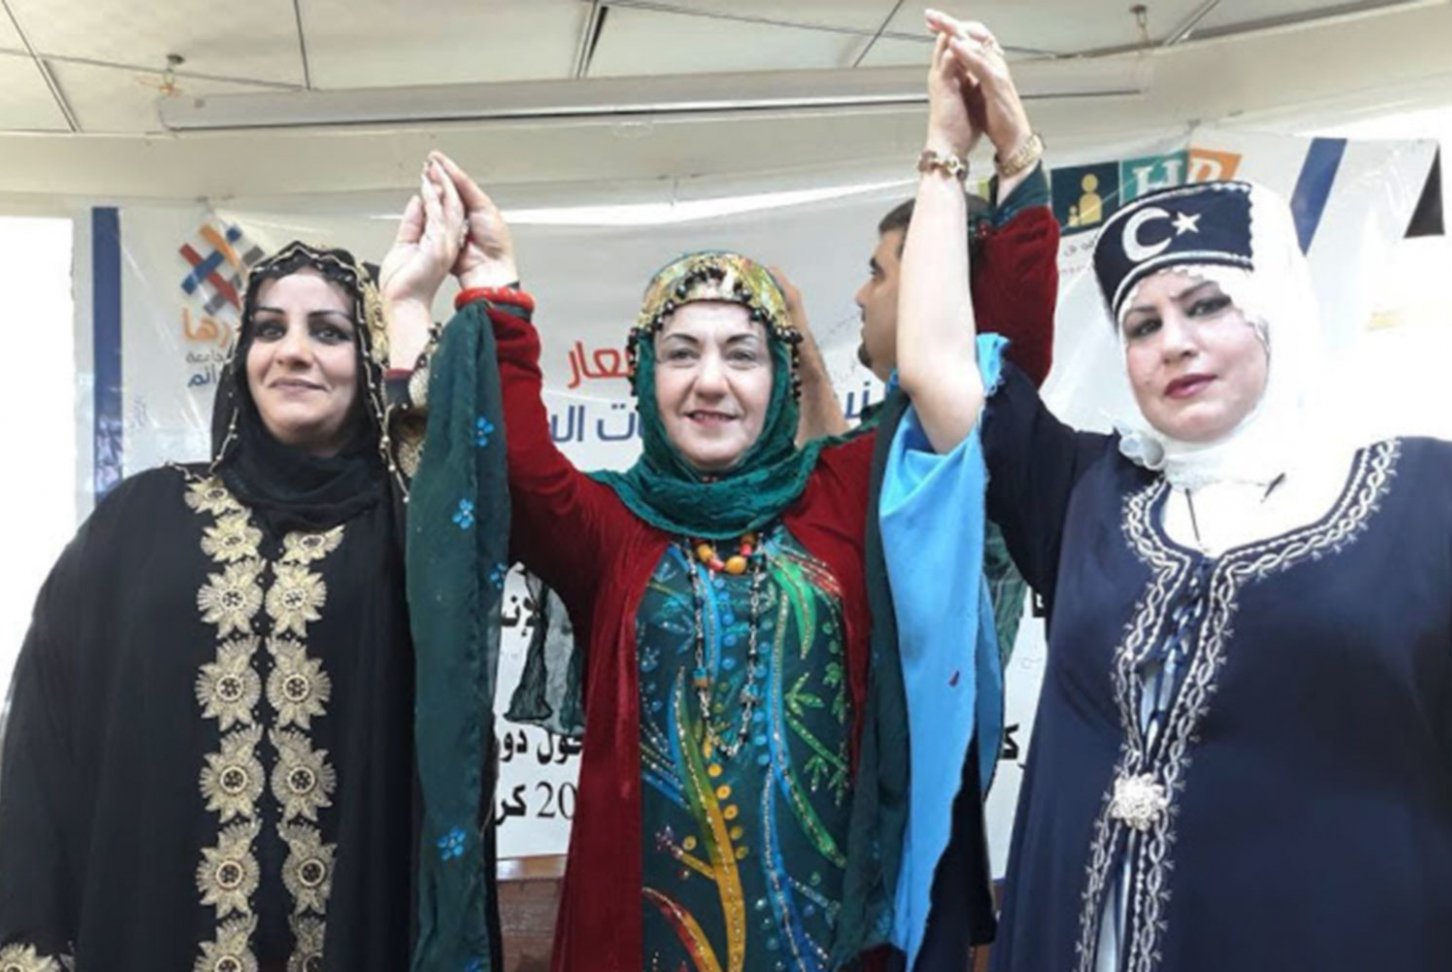 Photo of three Iraqi women from different ethnic backgrounds in traditional dress raising their hands together in solidarity.